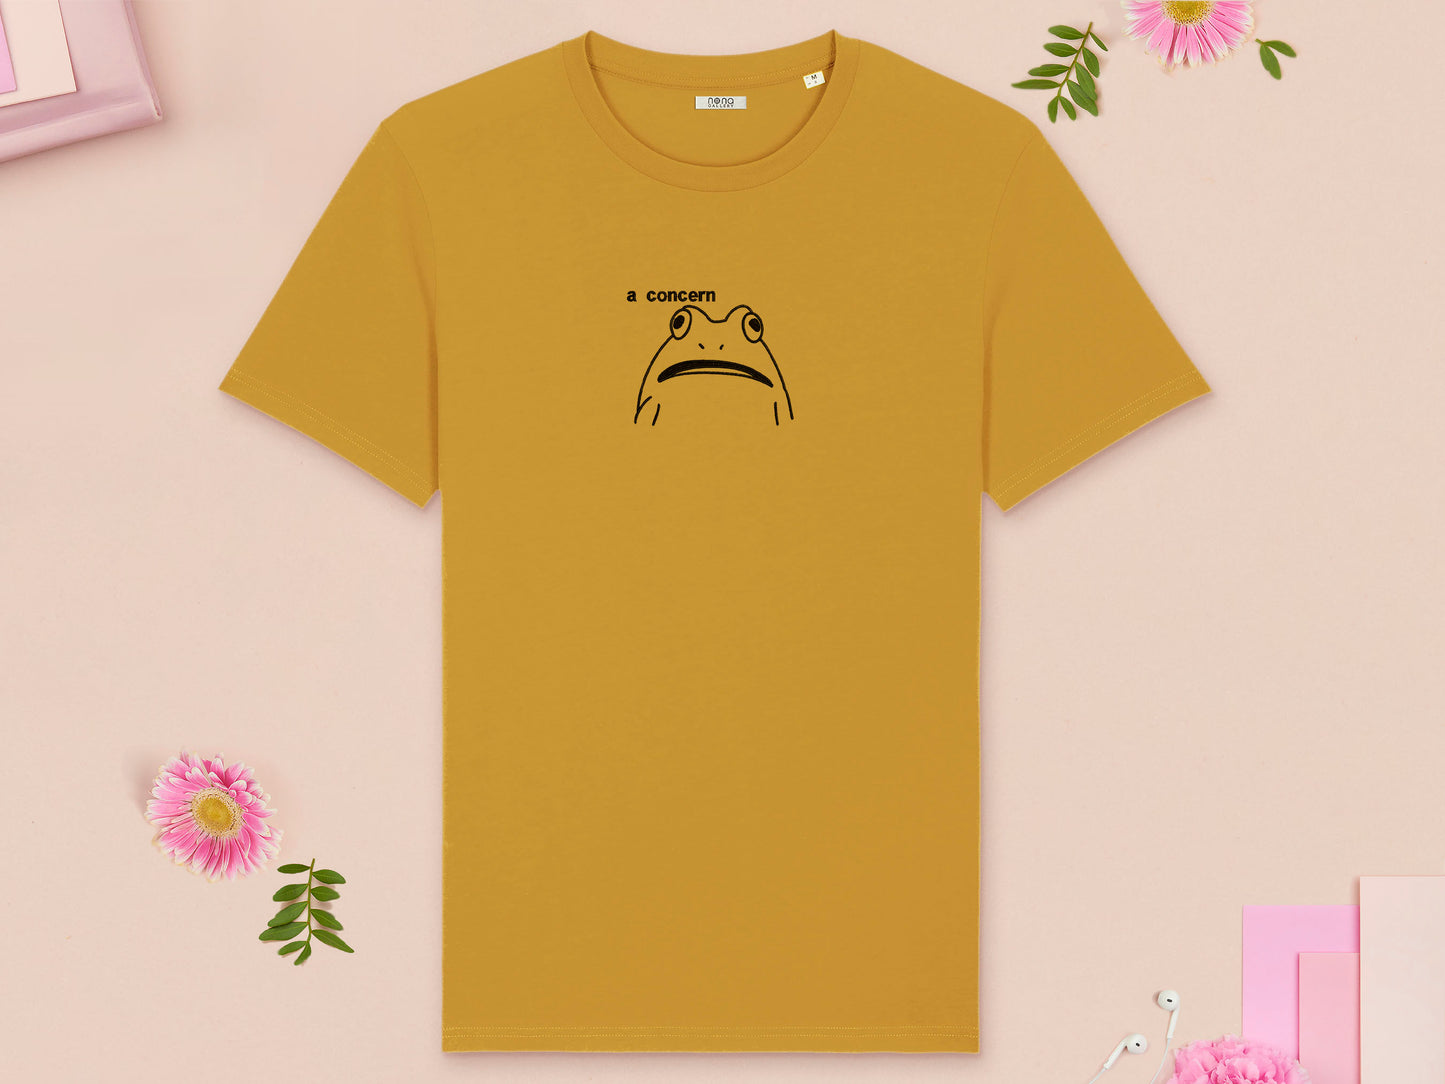 A yellow crew neck short sleeve t-shirt, with an embroidered black thread design of cute confused looking frog with the text a concern.